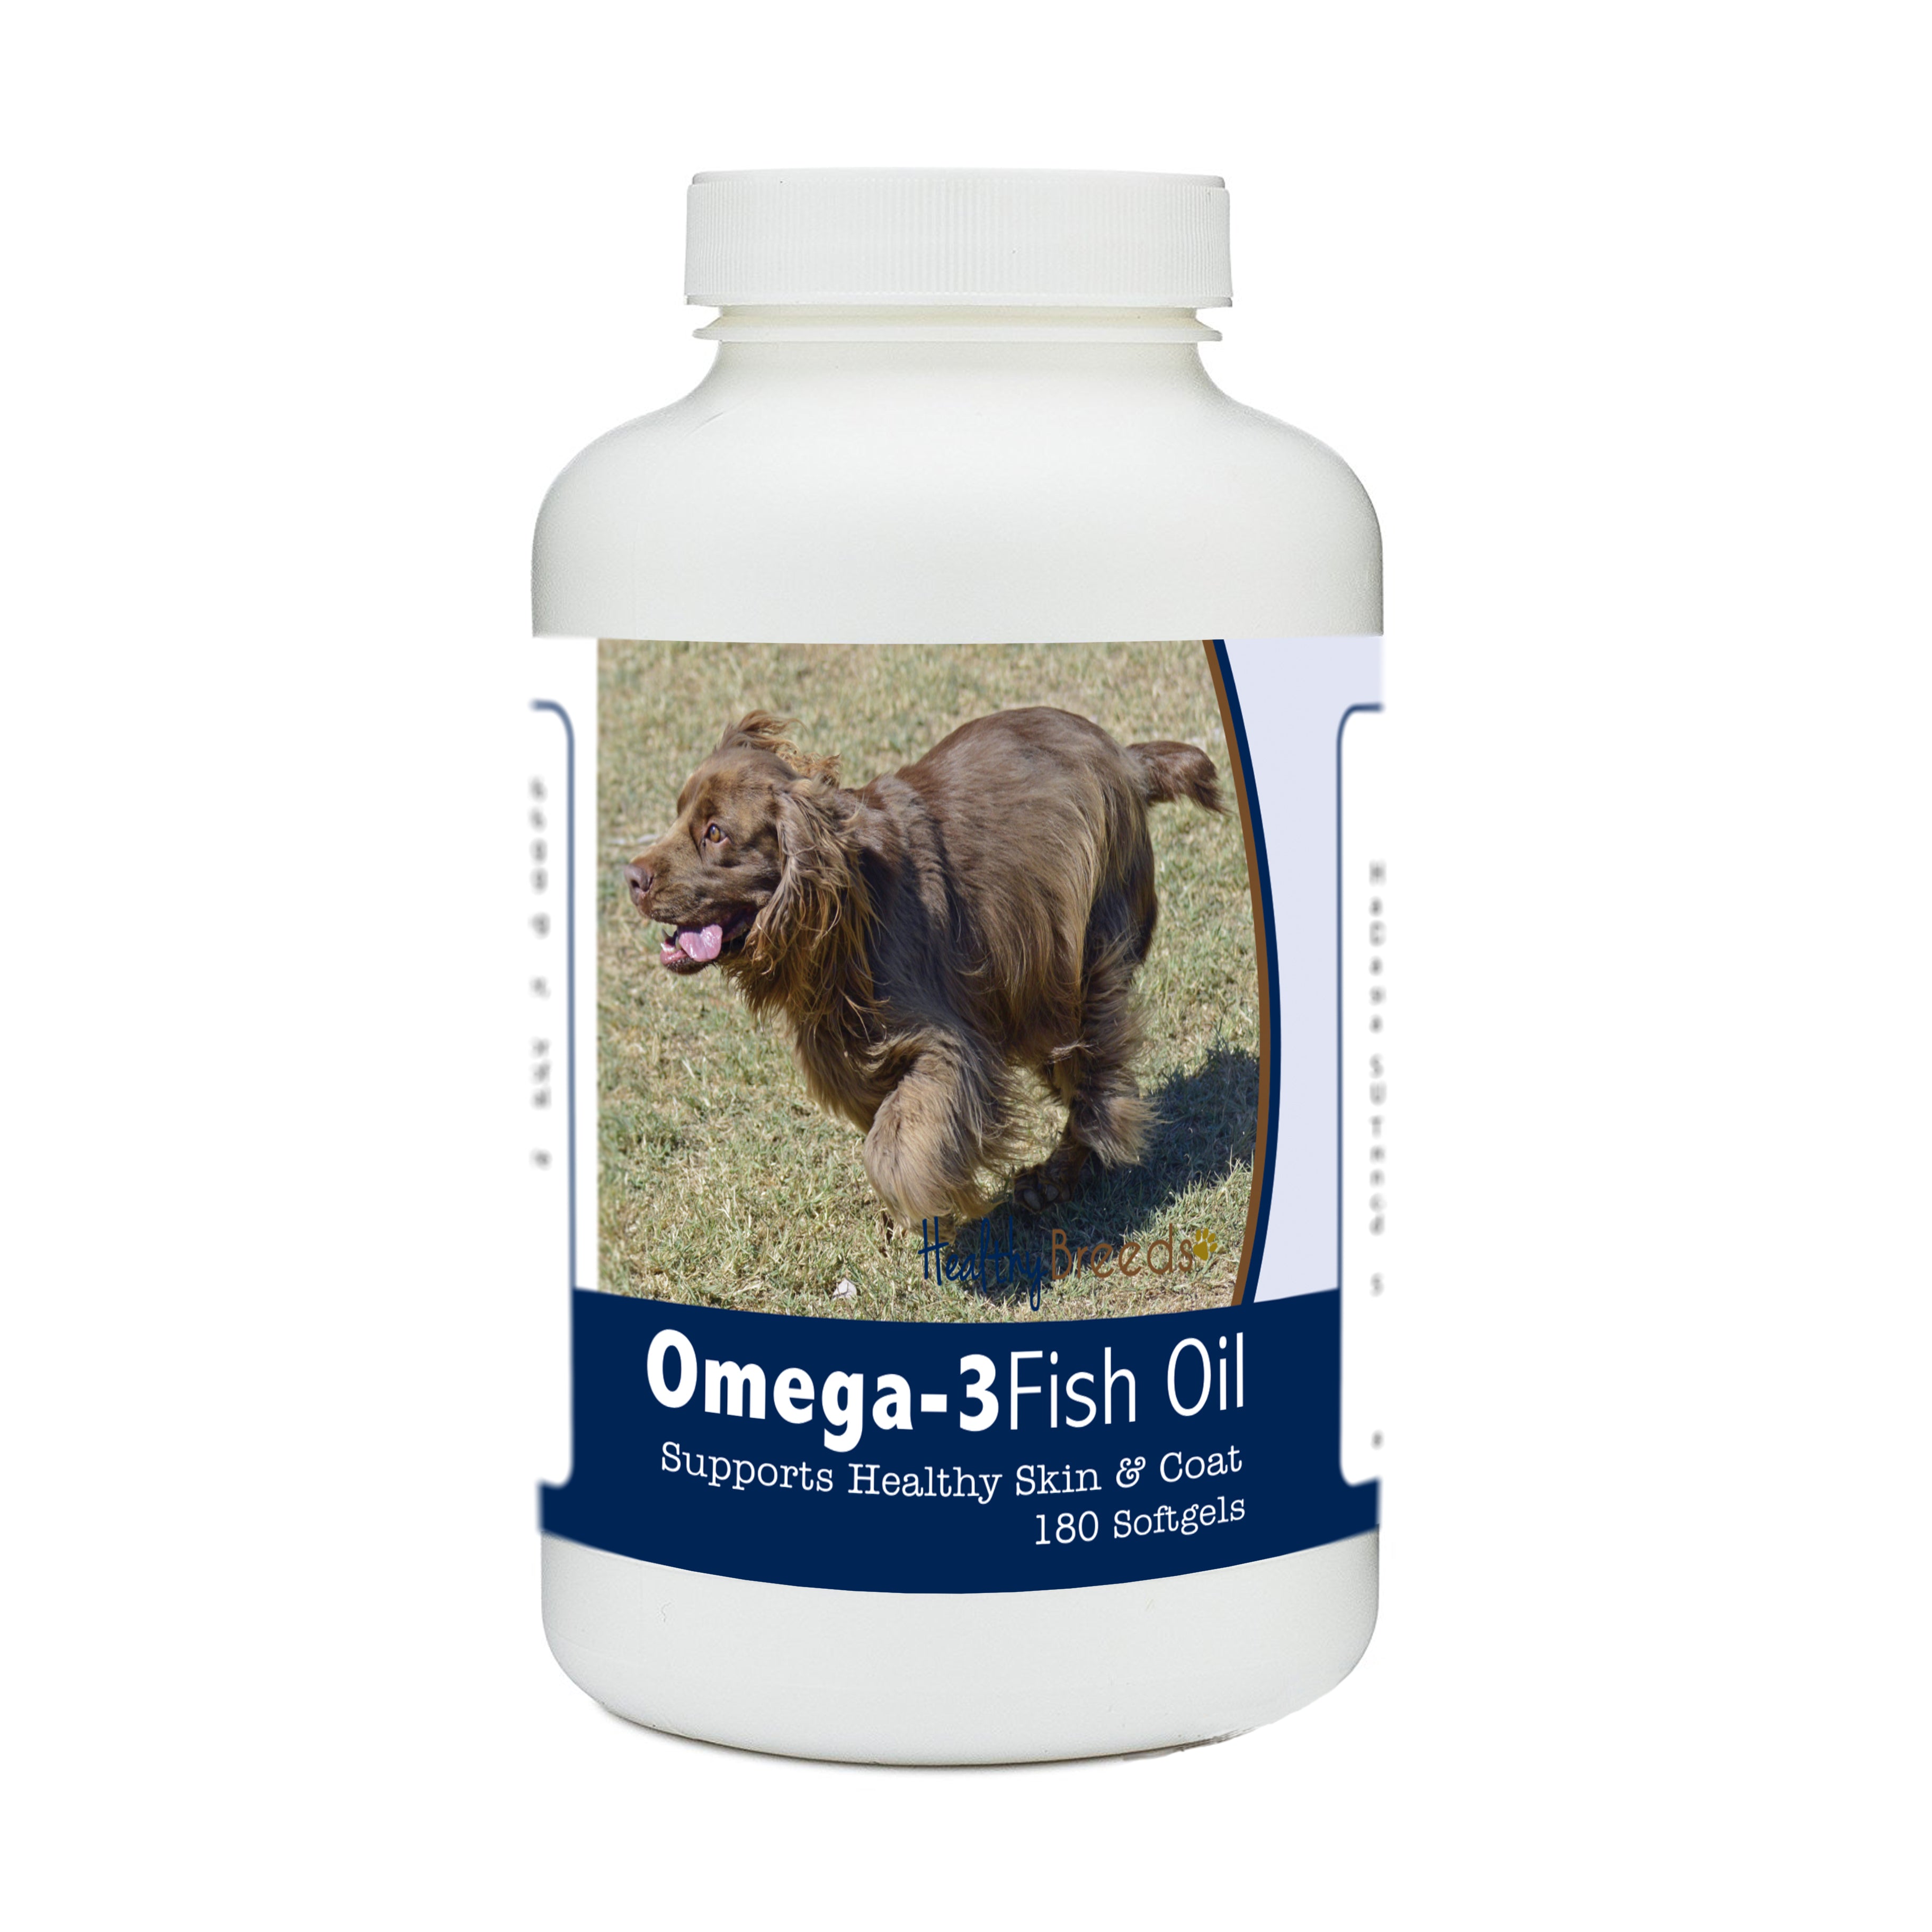 Sussex Spaniel Omega-3 Fish Oil Softgels 180 Count